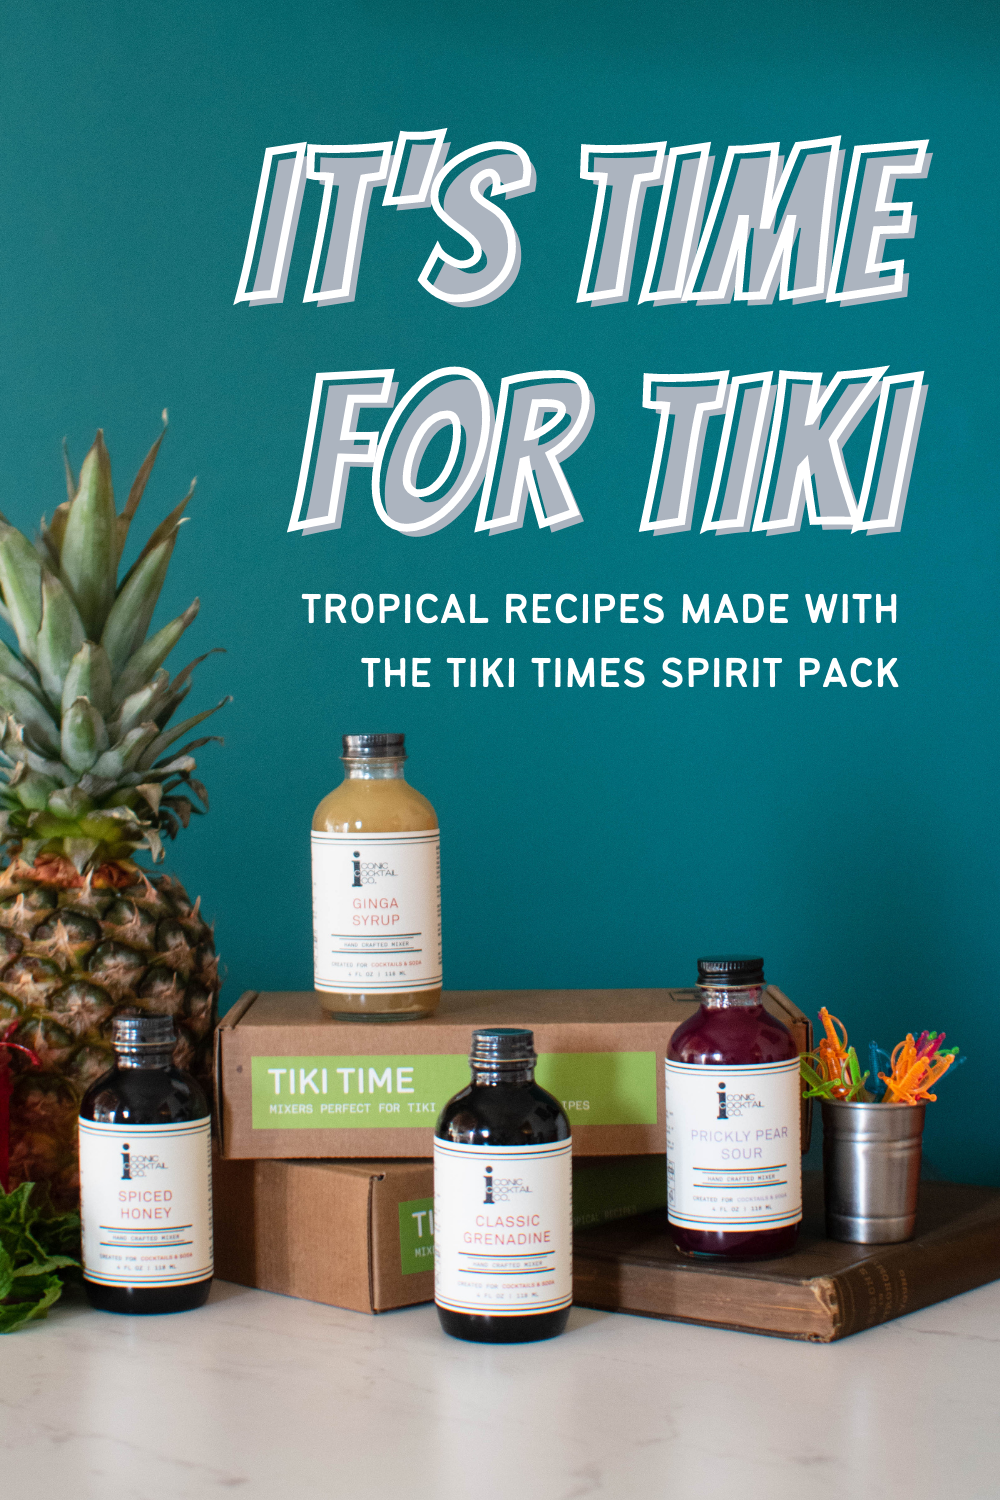 It's Tiki Time! Tropical Recipes Featuring the Tiki Pack!